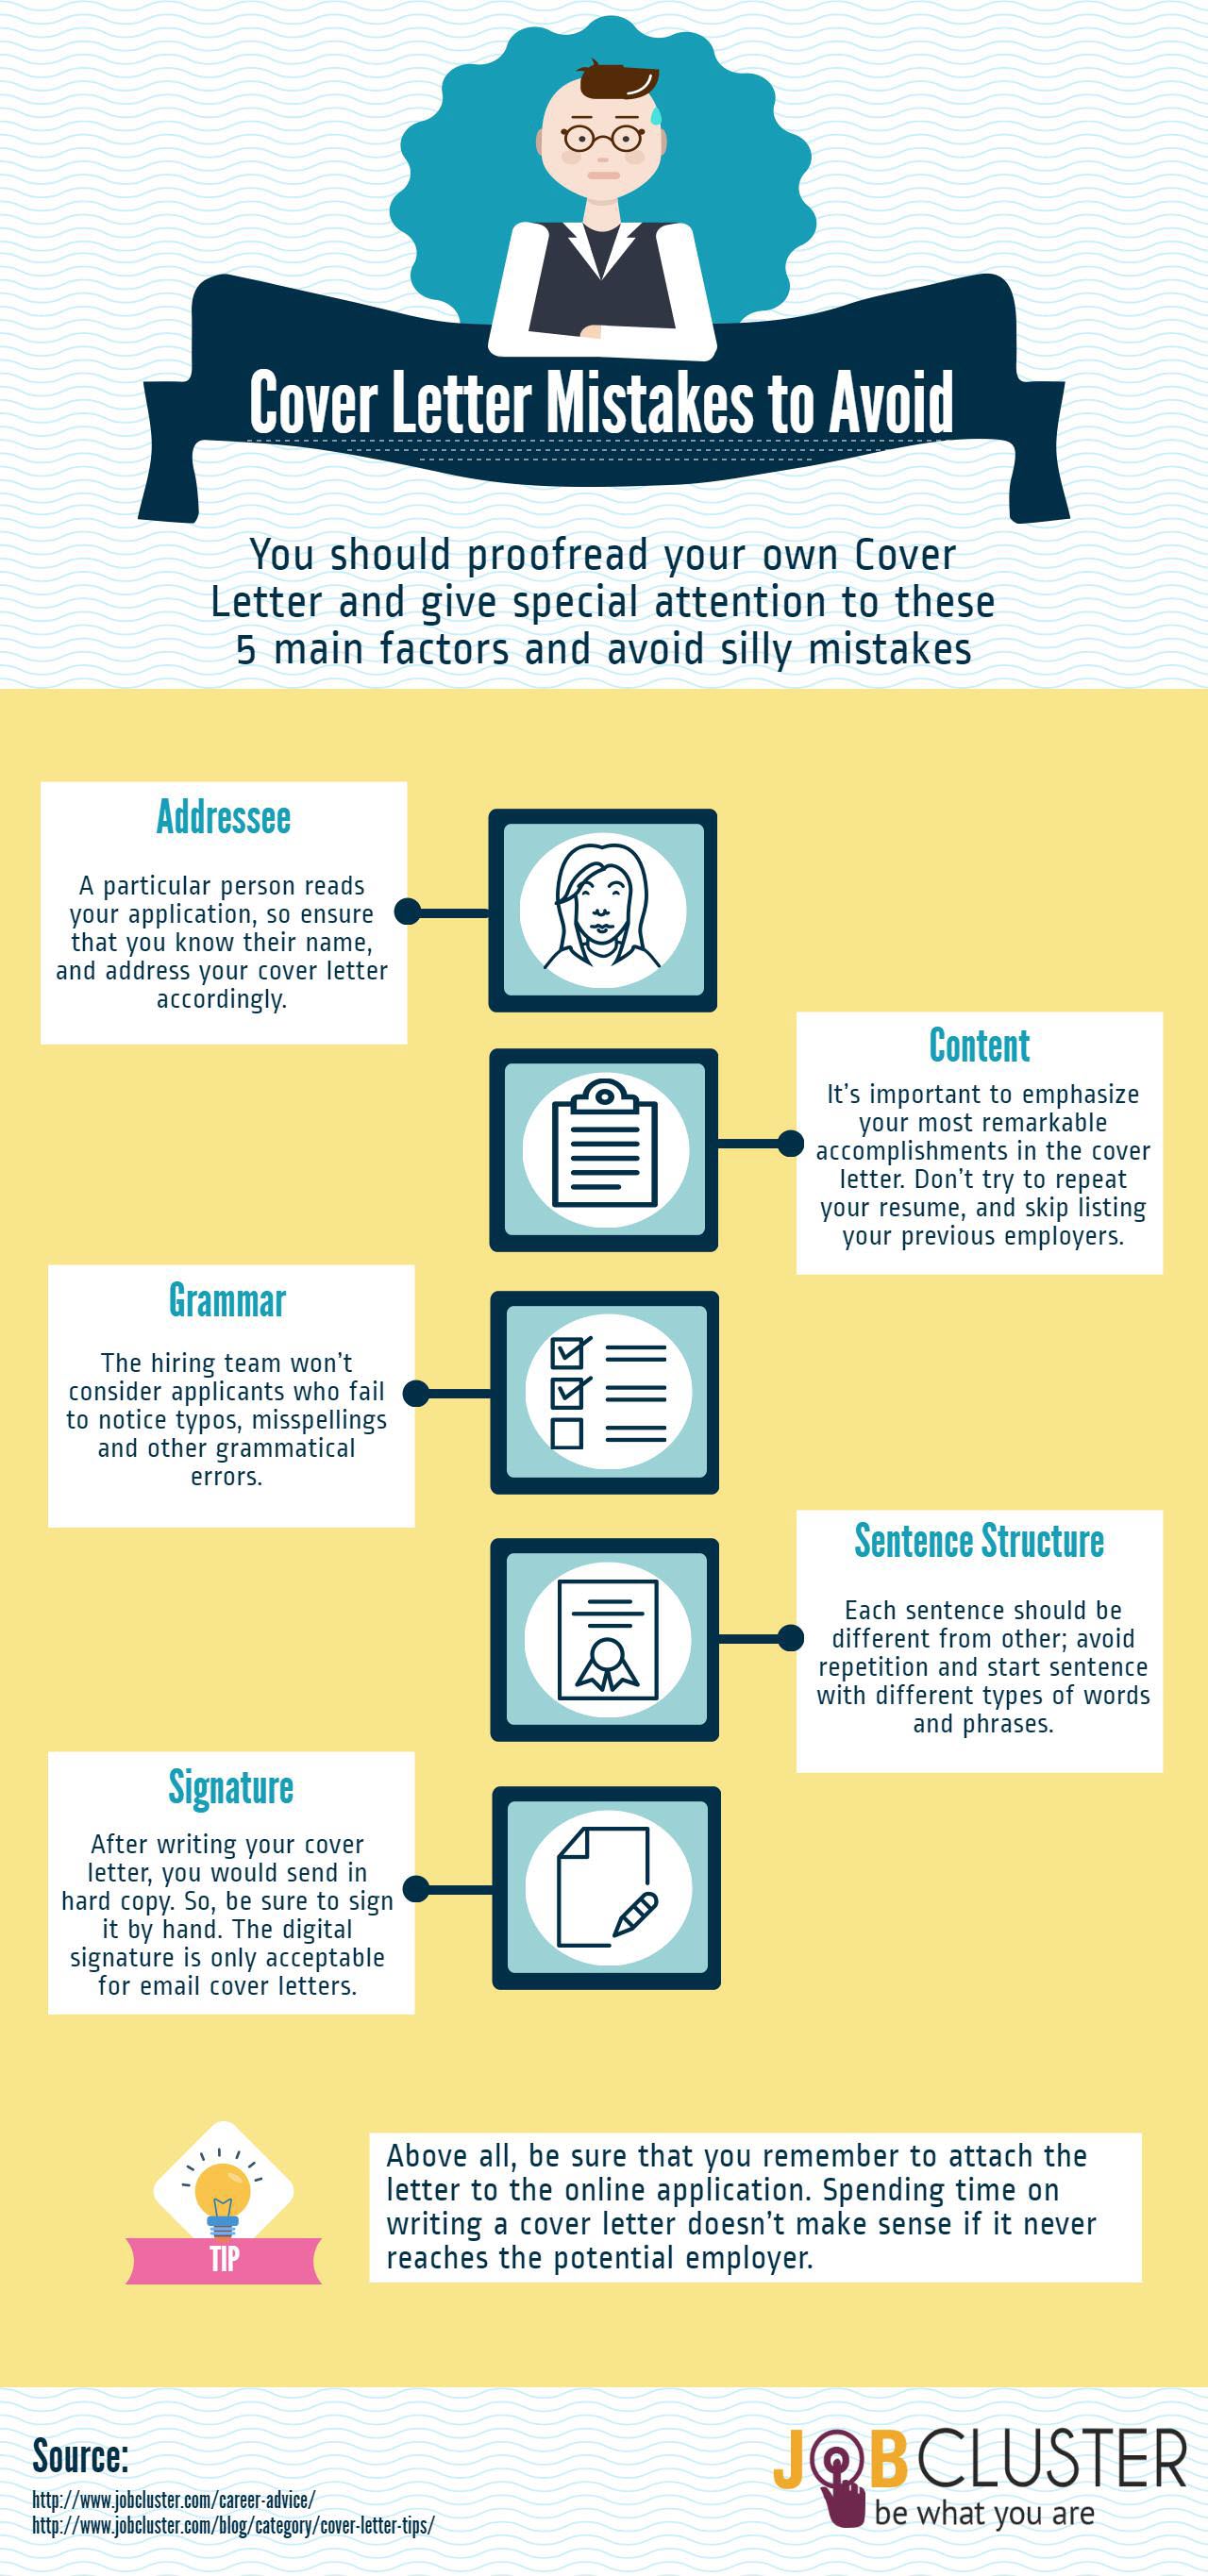 Cover Letter Mistakes to Avoid- Infpgraphic